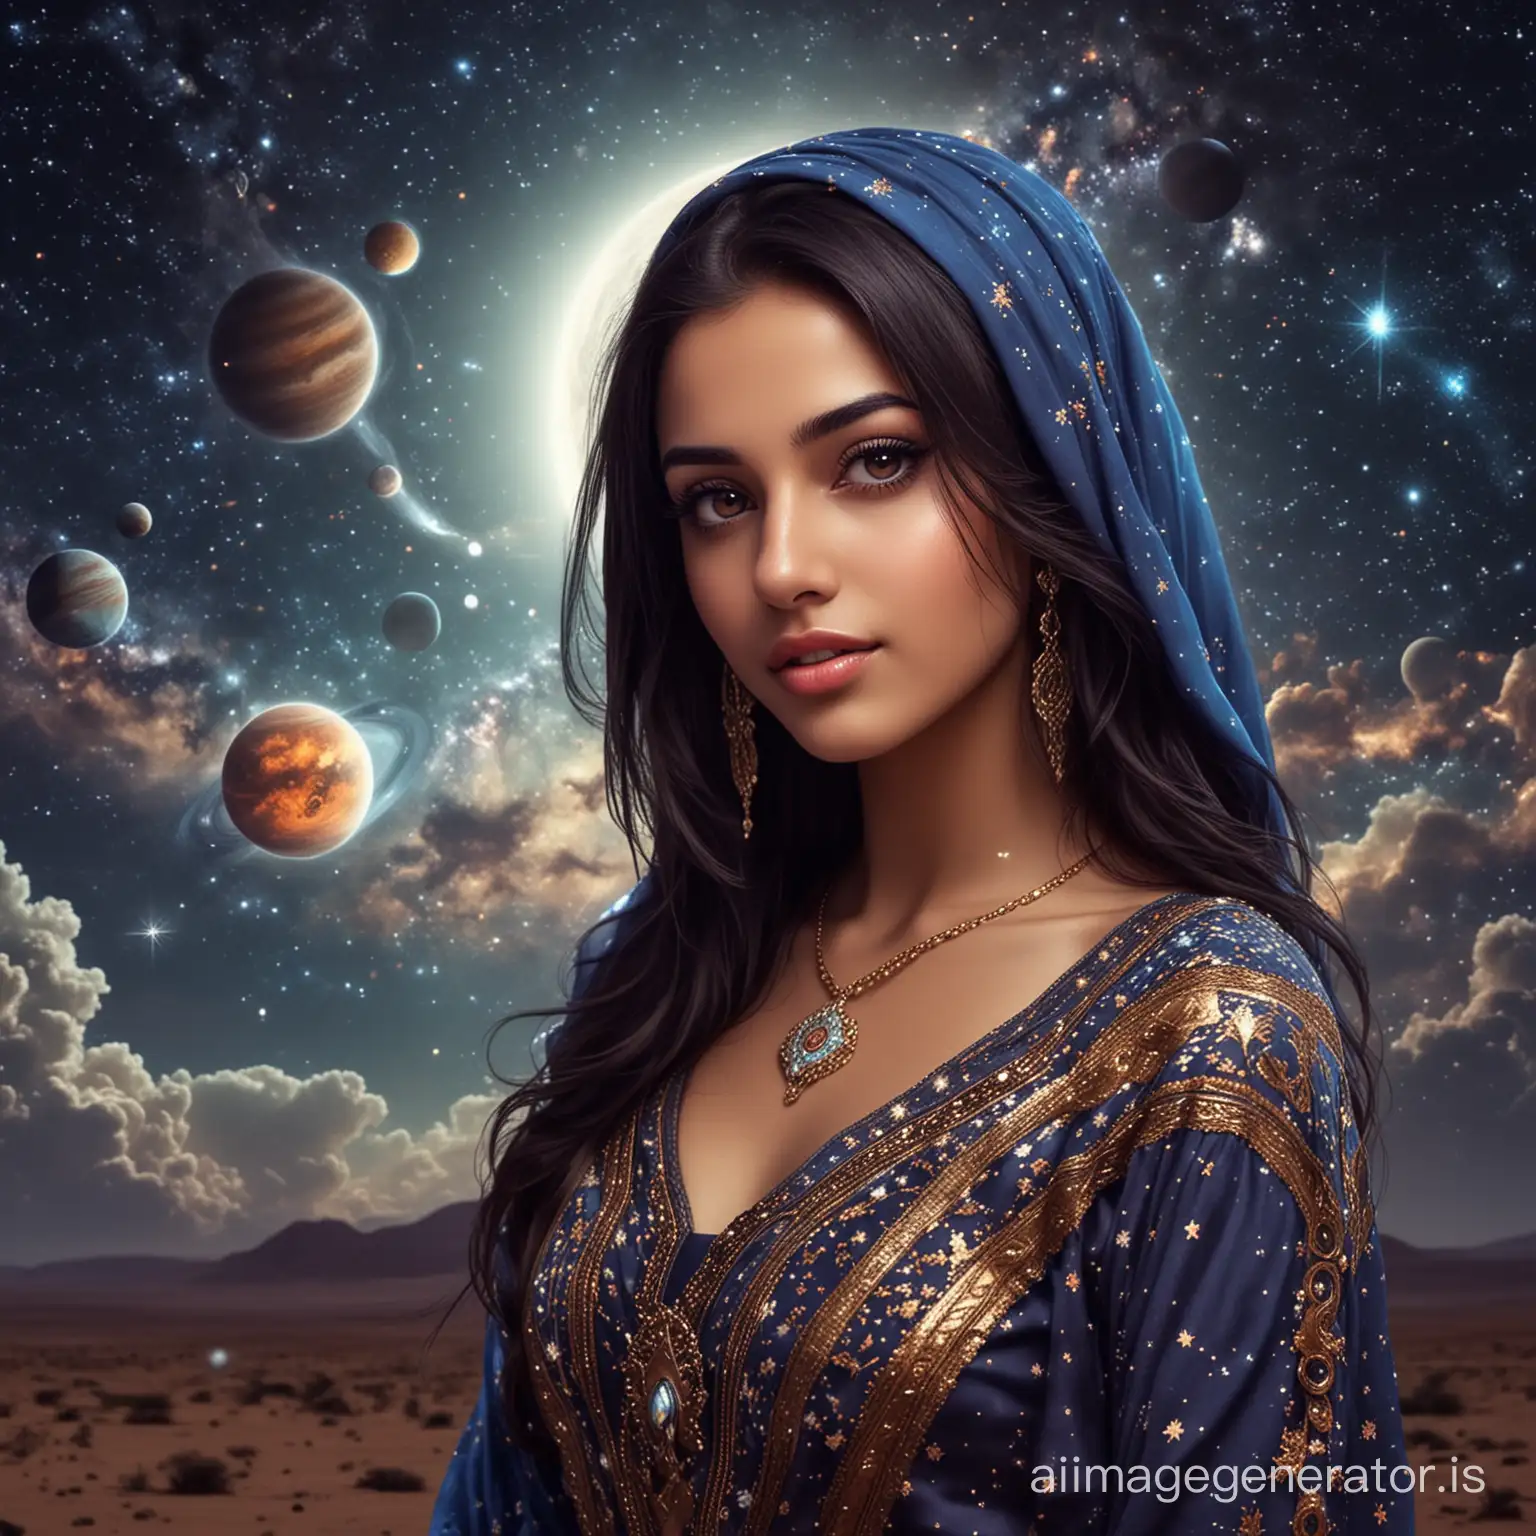 Magical-Beauty-Arab-Girl-Amidst-the-Astrological-Universe